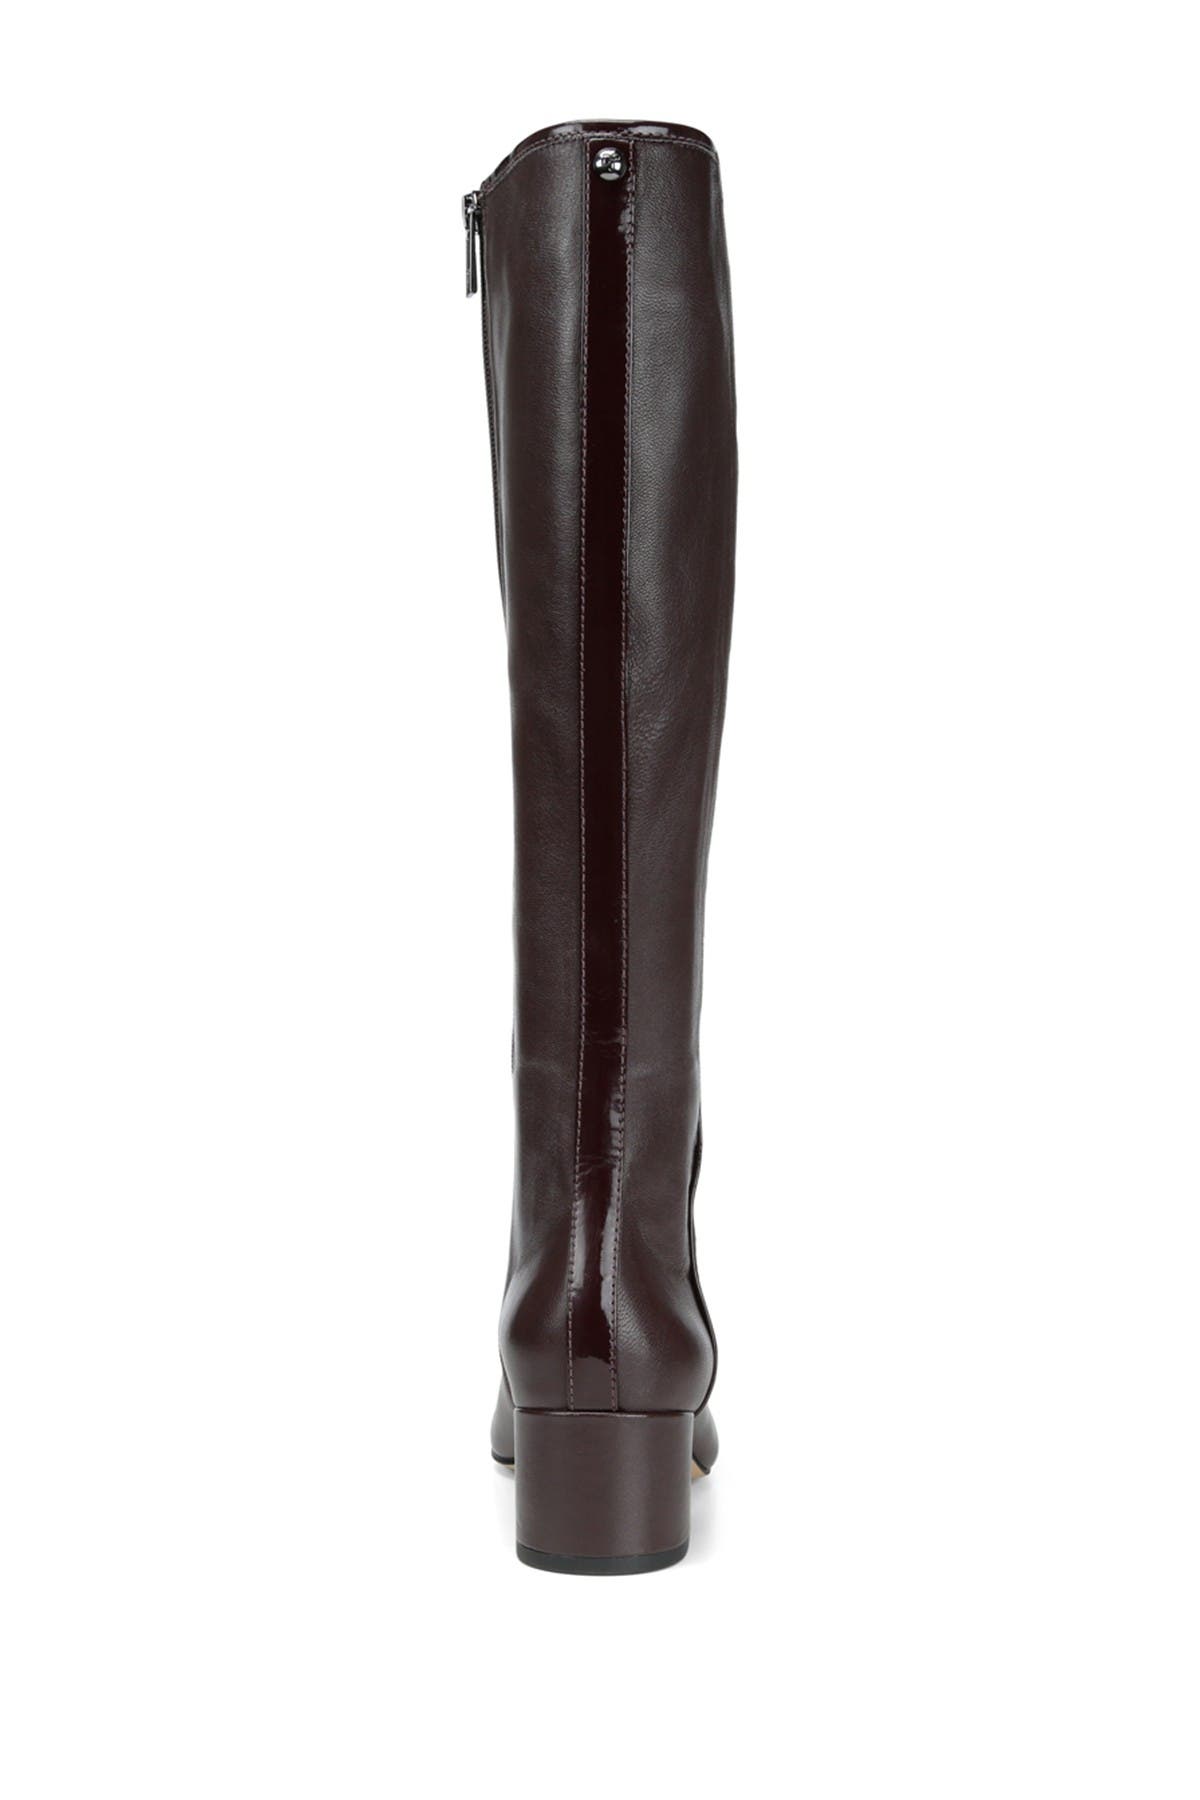 donald pliner camille suede boot